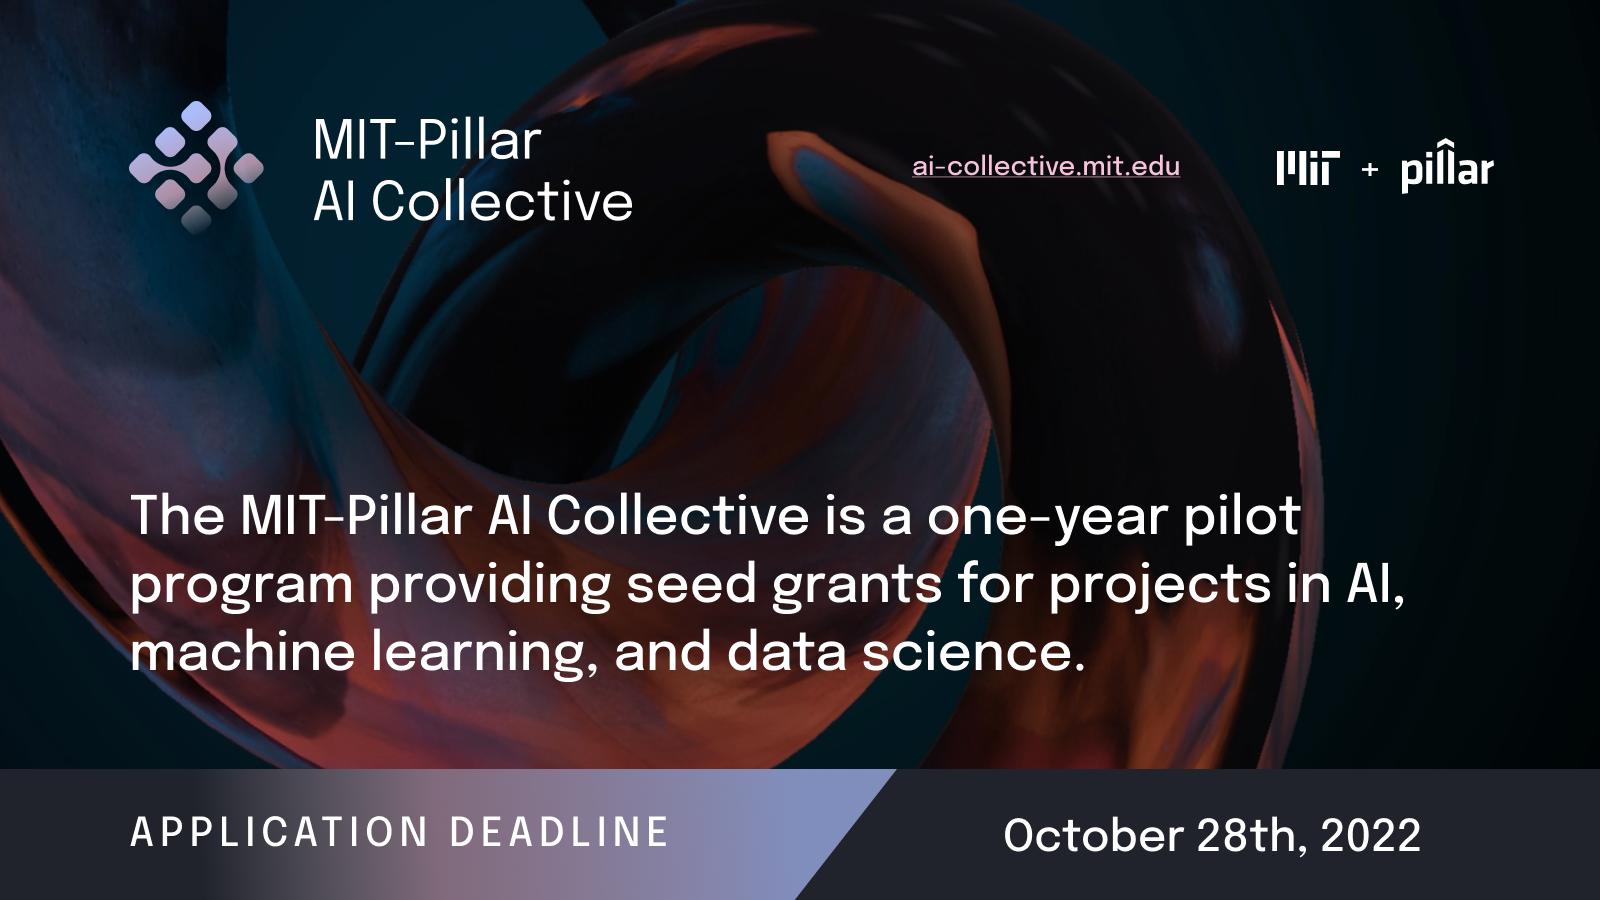 MIT-Pillar AI Collective announces first seed grant recipients